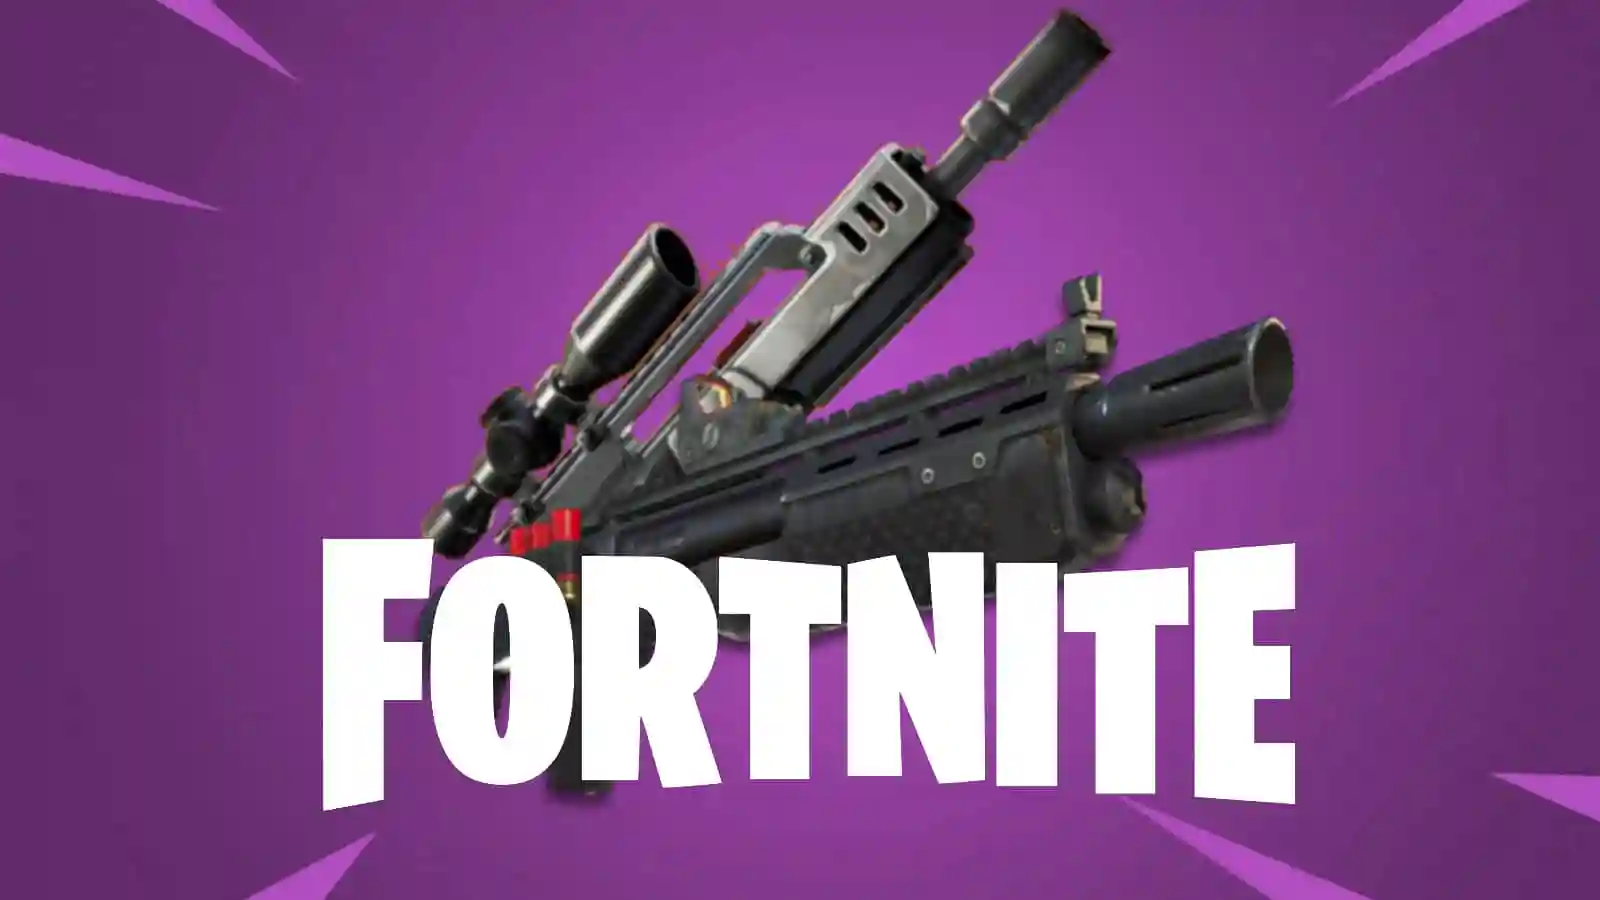 New Fortnite Weapons, Skins, and Many More